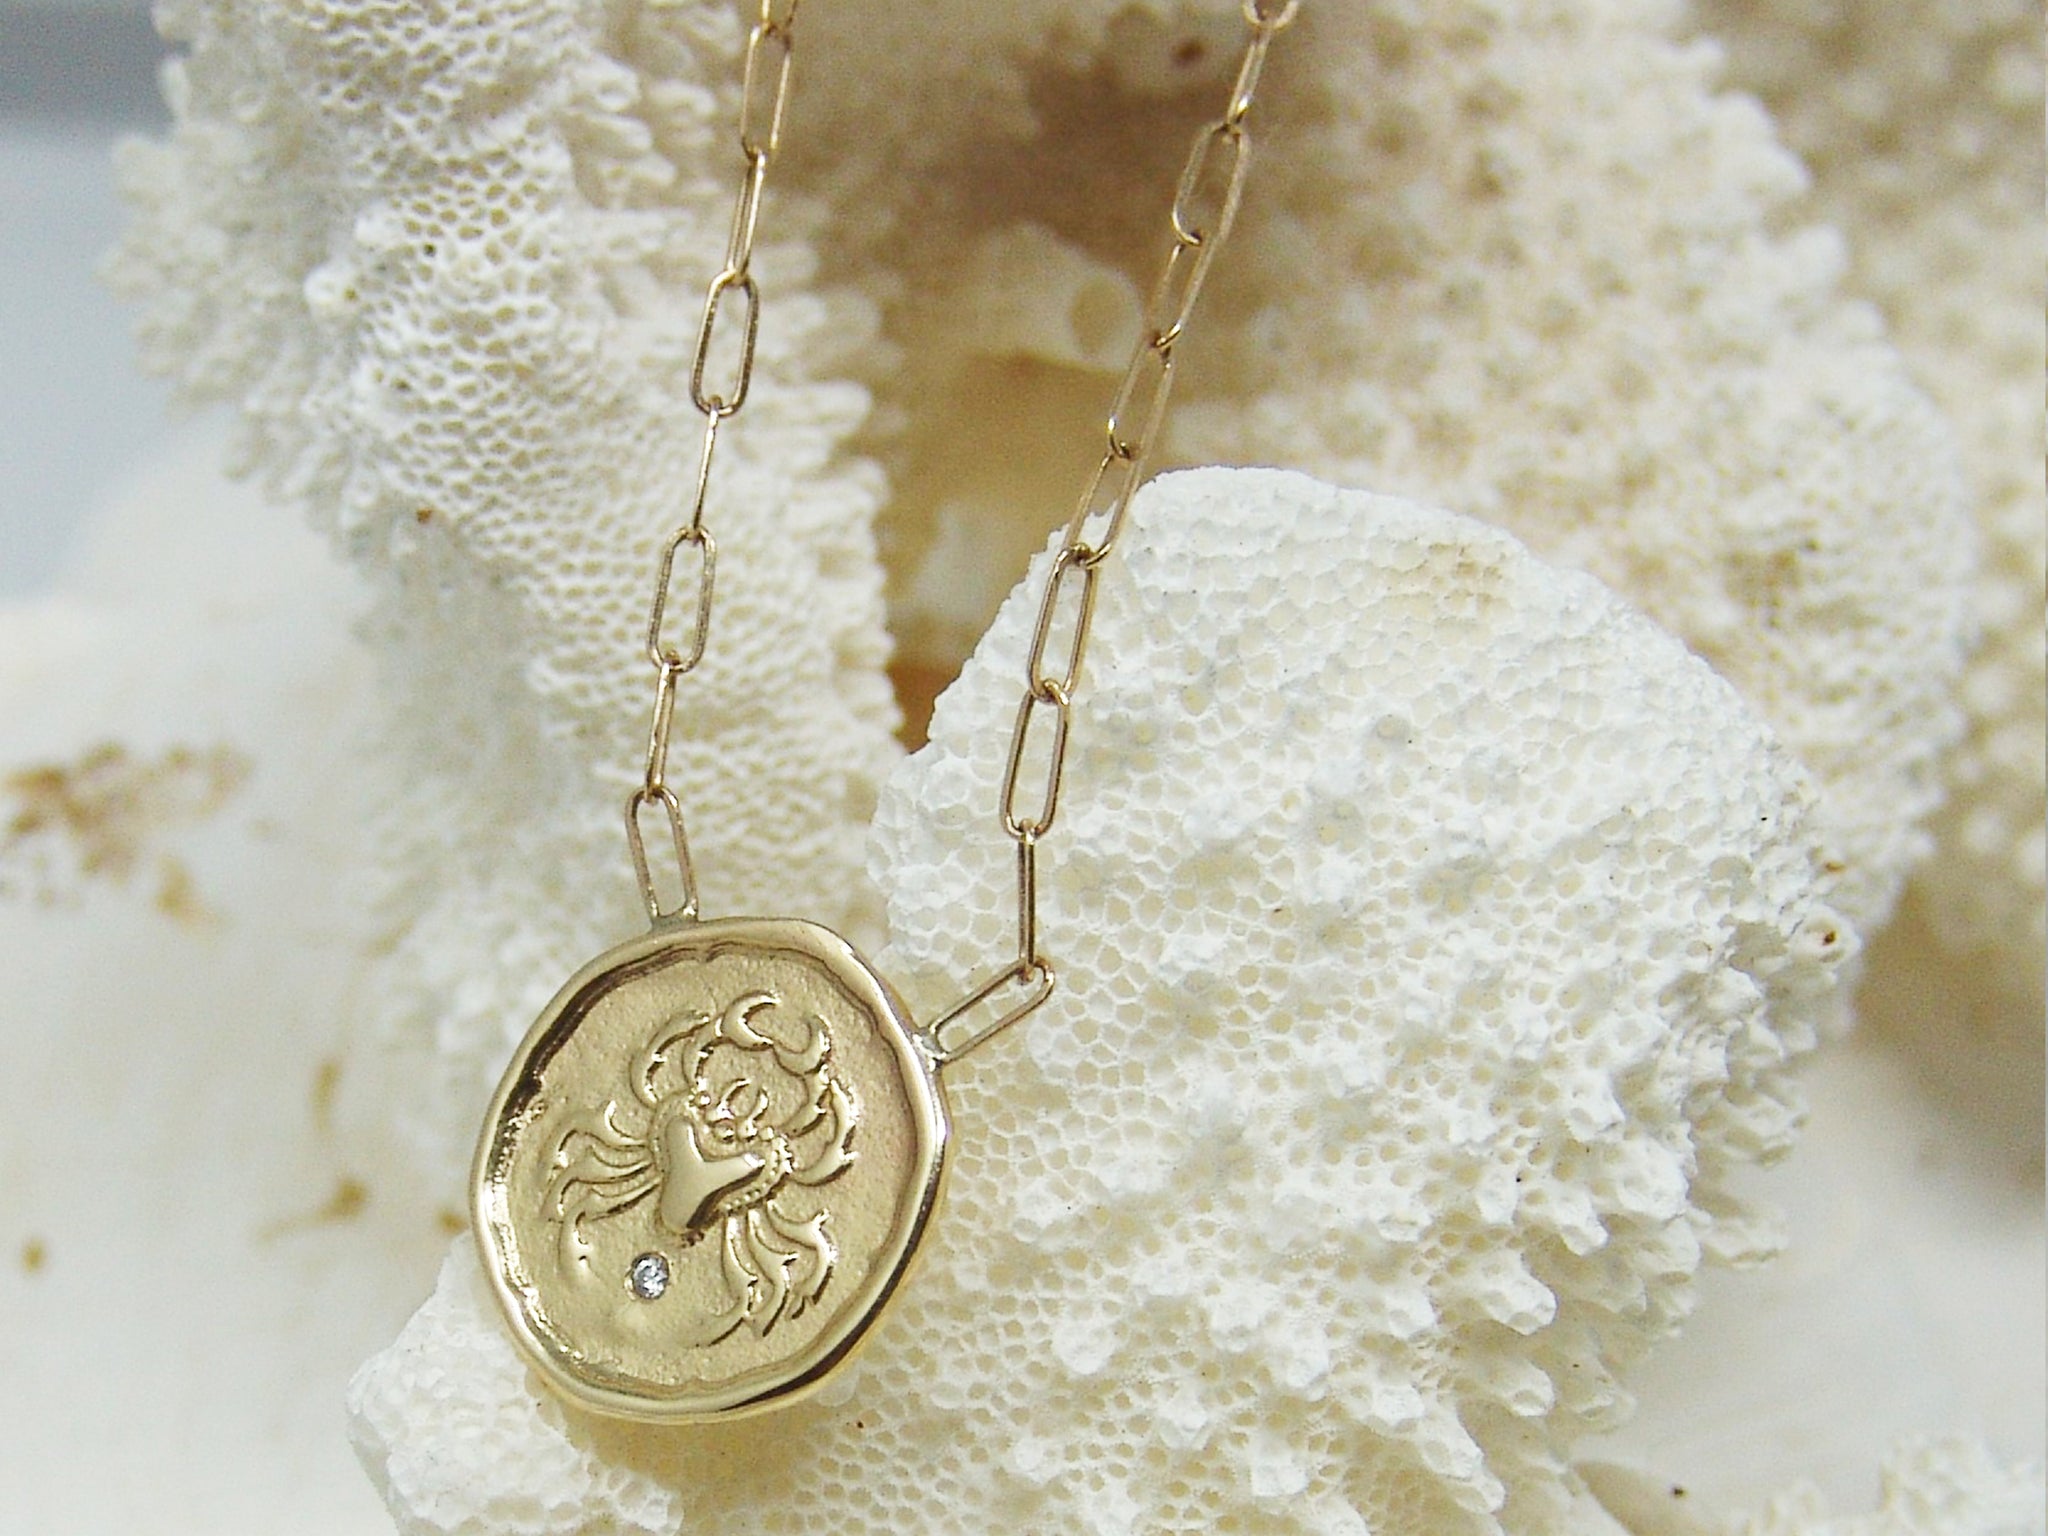 Cancer (Crab) Astrology Necklace